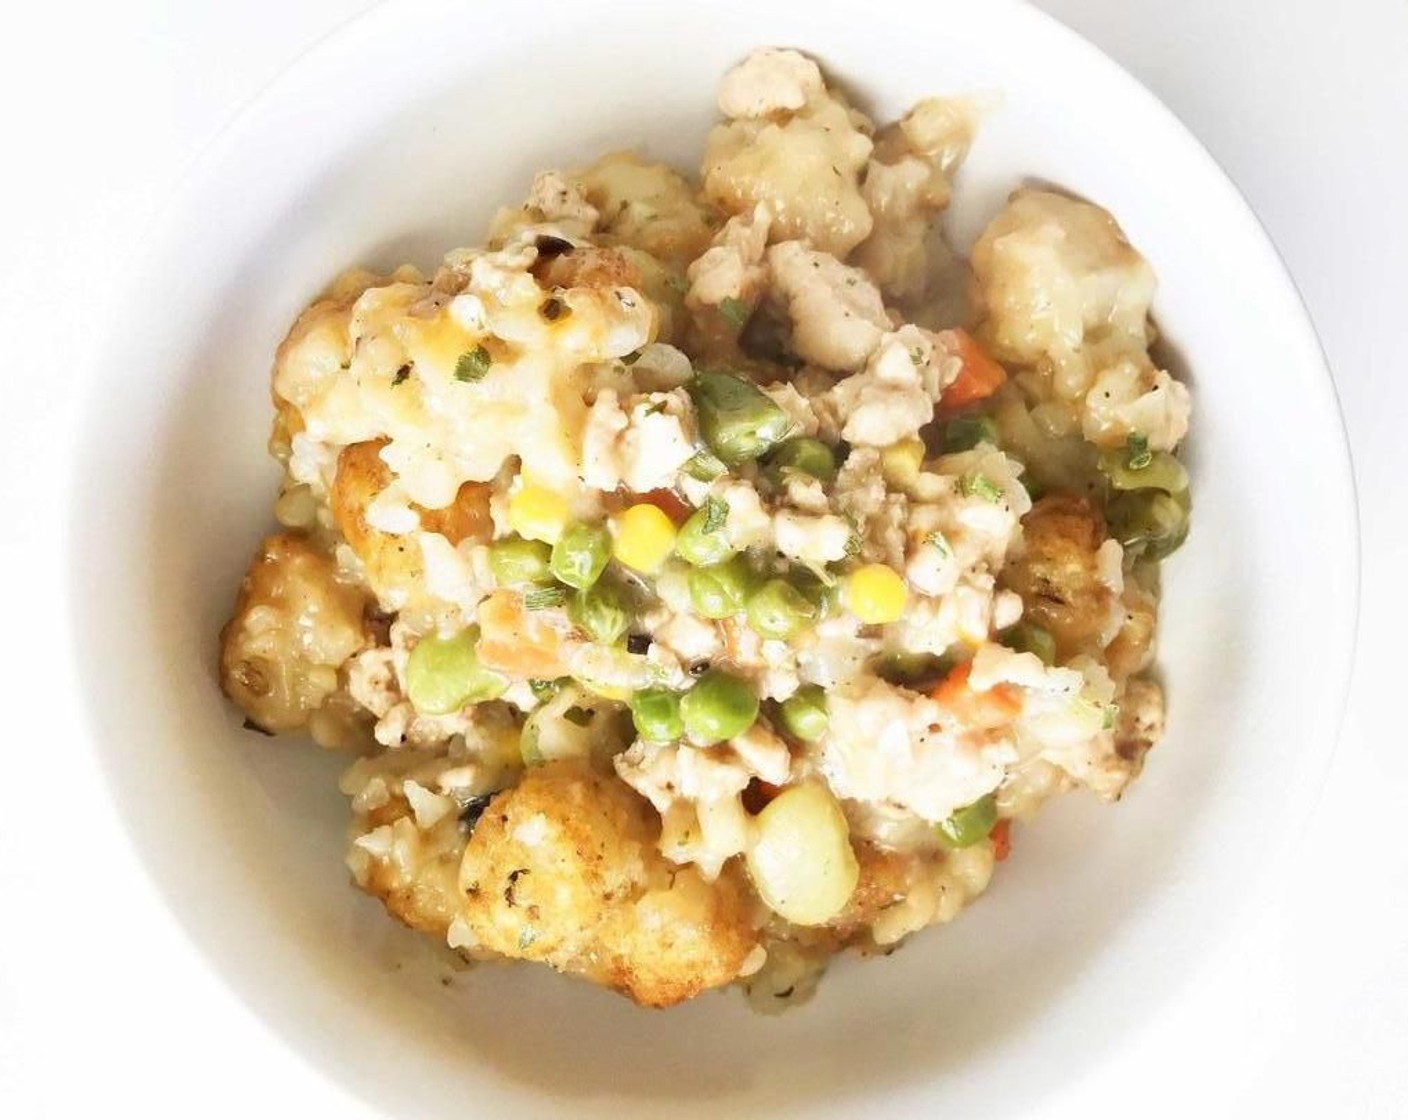 Healthified Tater Tot Casserole